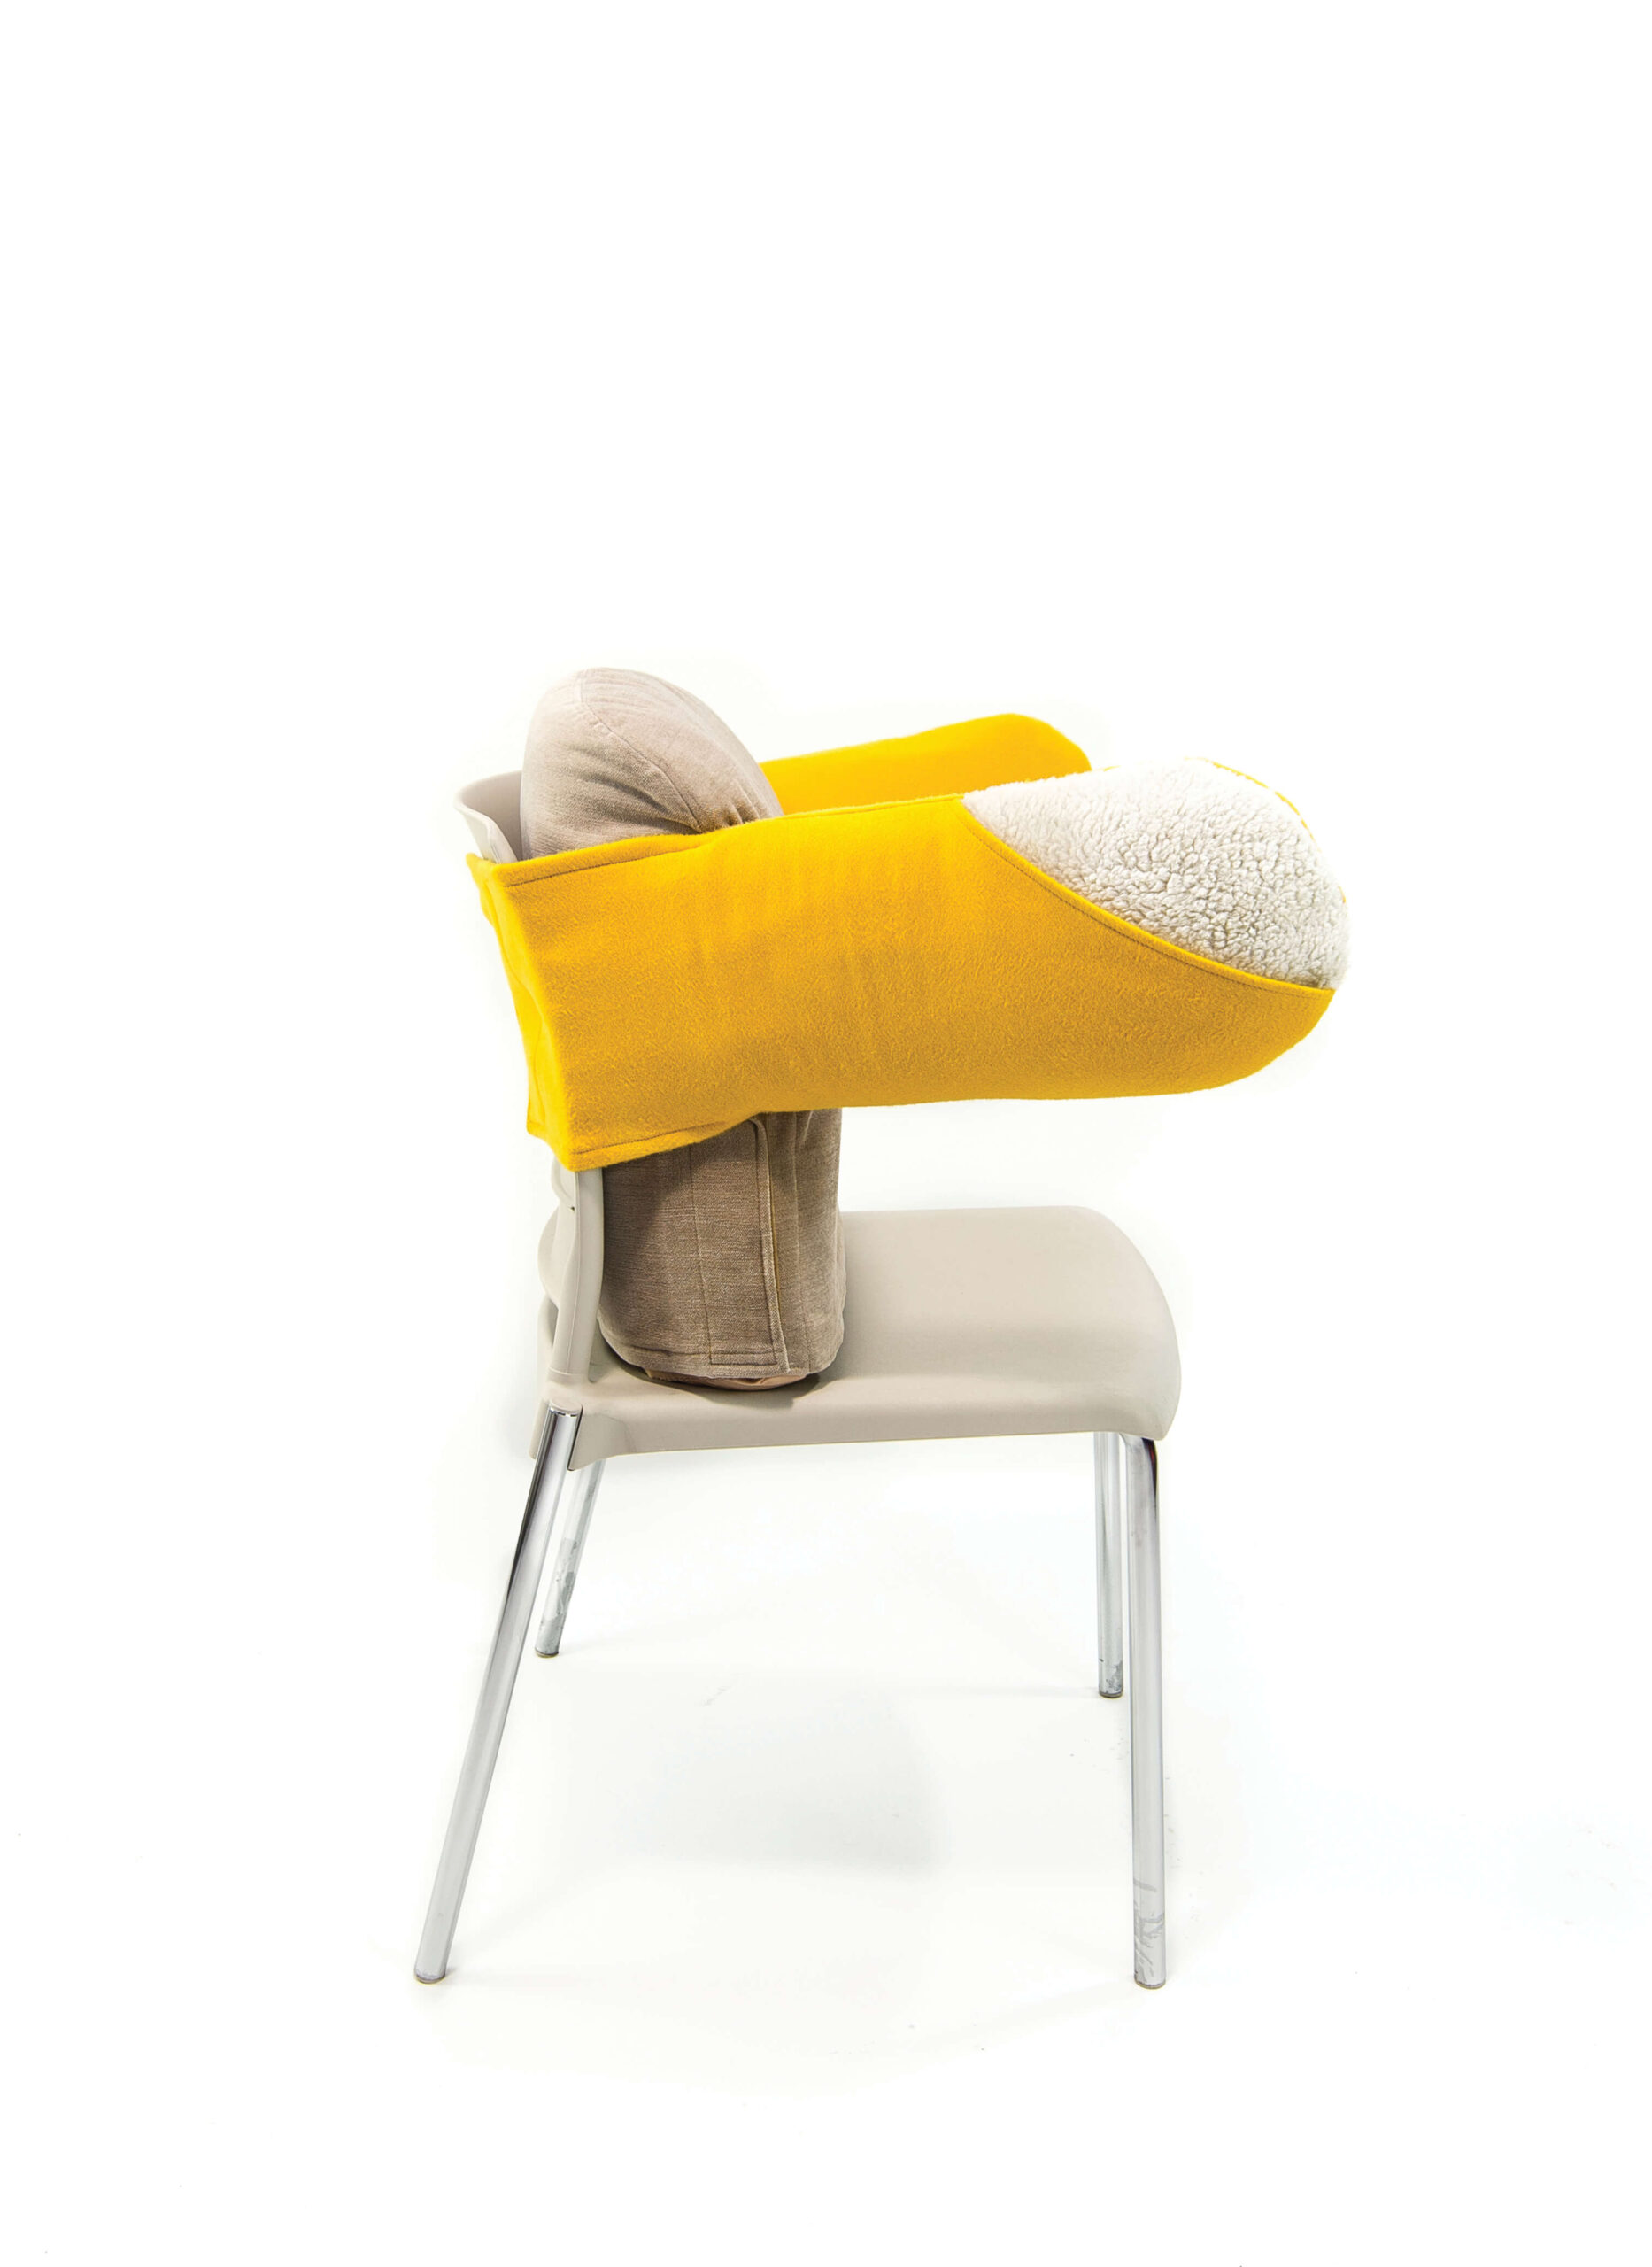 Side view of a chair with oversized armrests in yellow. The rest of the chair is grey. The arm rests are made of a plush material, while the rest of the chair is made of plastic. The chair is set against a white backdrop.